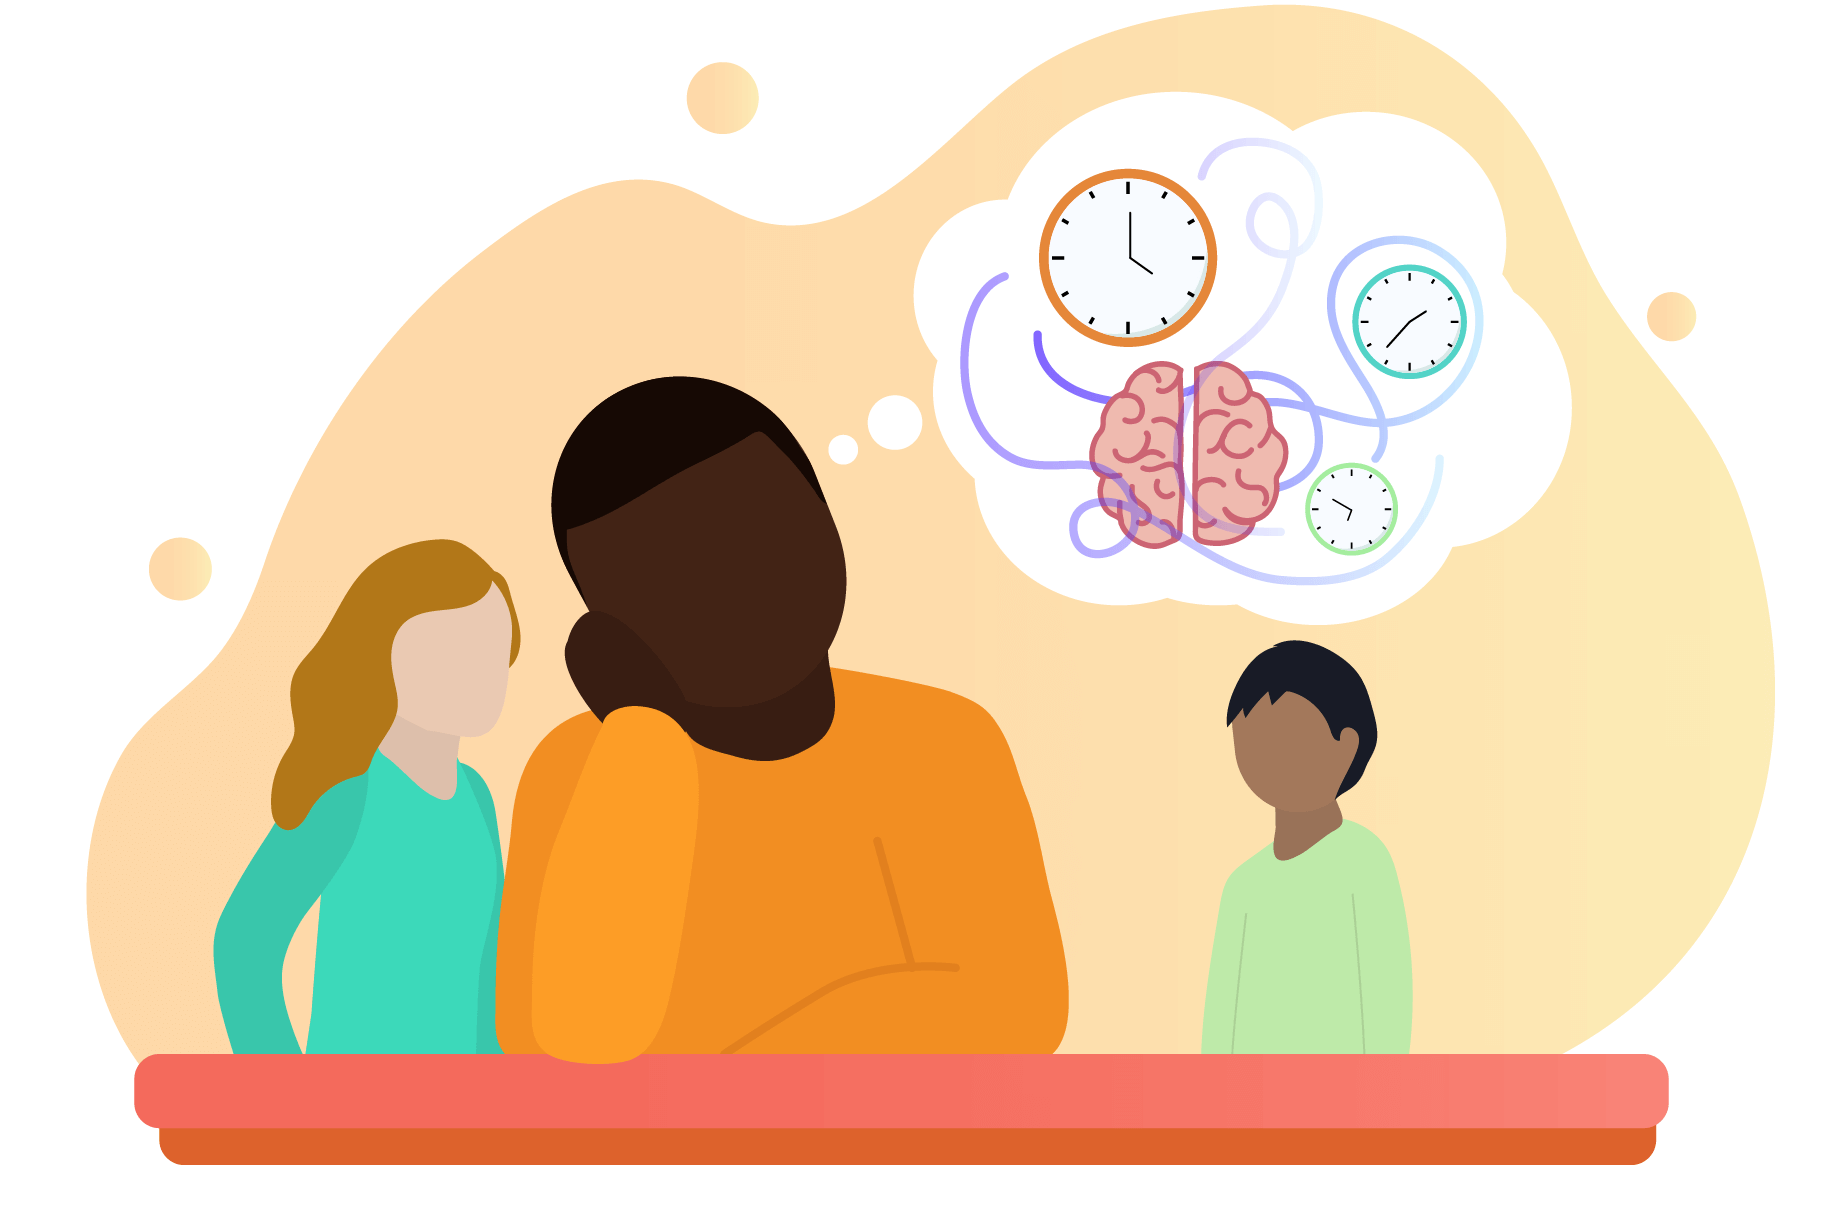  A worker with other individuals in the background and a thought bubble showing a brain and a bunch of clocks, indicating other people’s schedules.